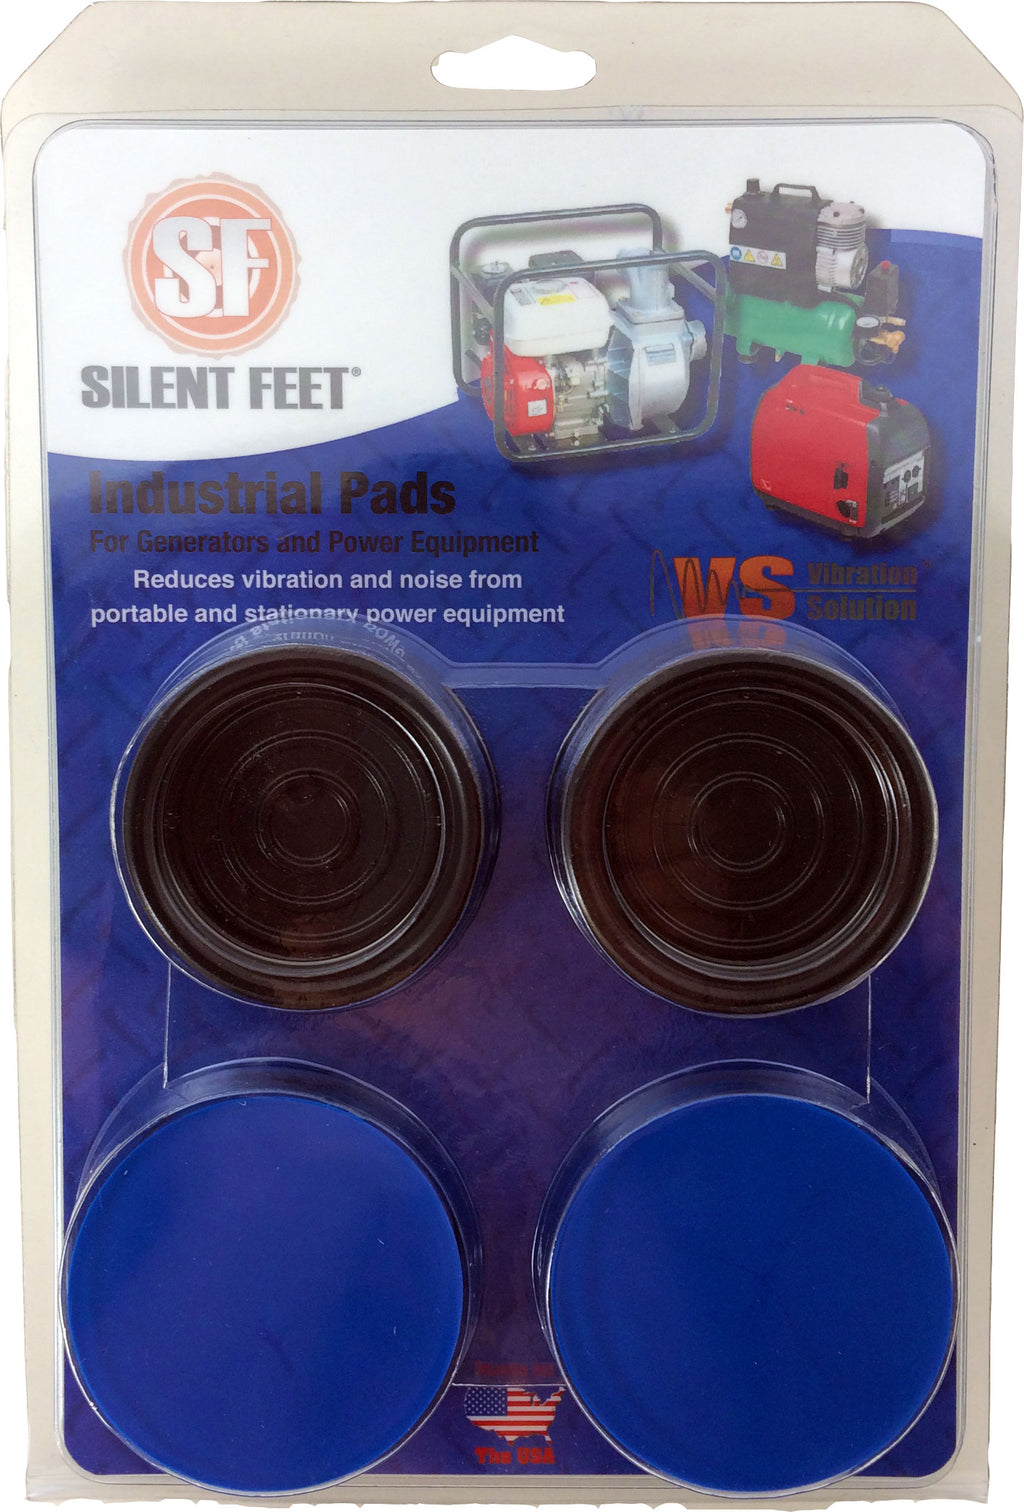 Silent Feet - Anti-Vibration Pads for Refrigerators and Freezers